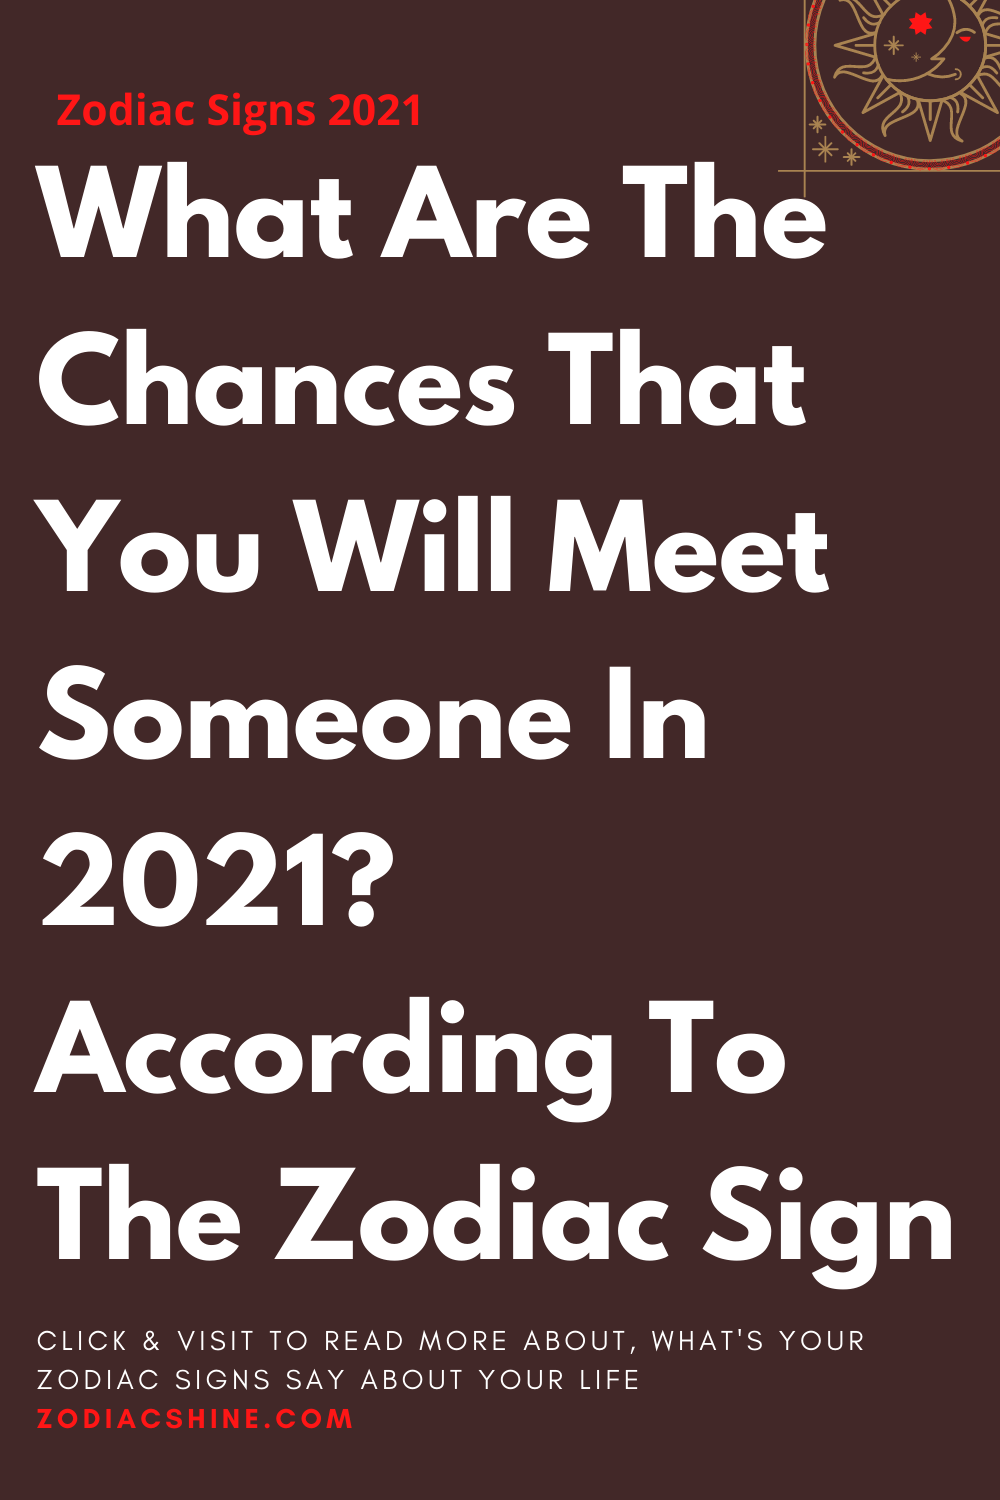 What Are The Chances That You Will Meet Someone In 2021? According To The Zodiac Sign